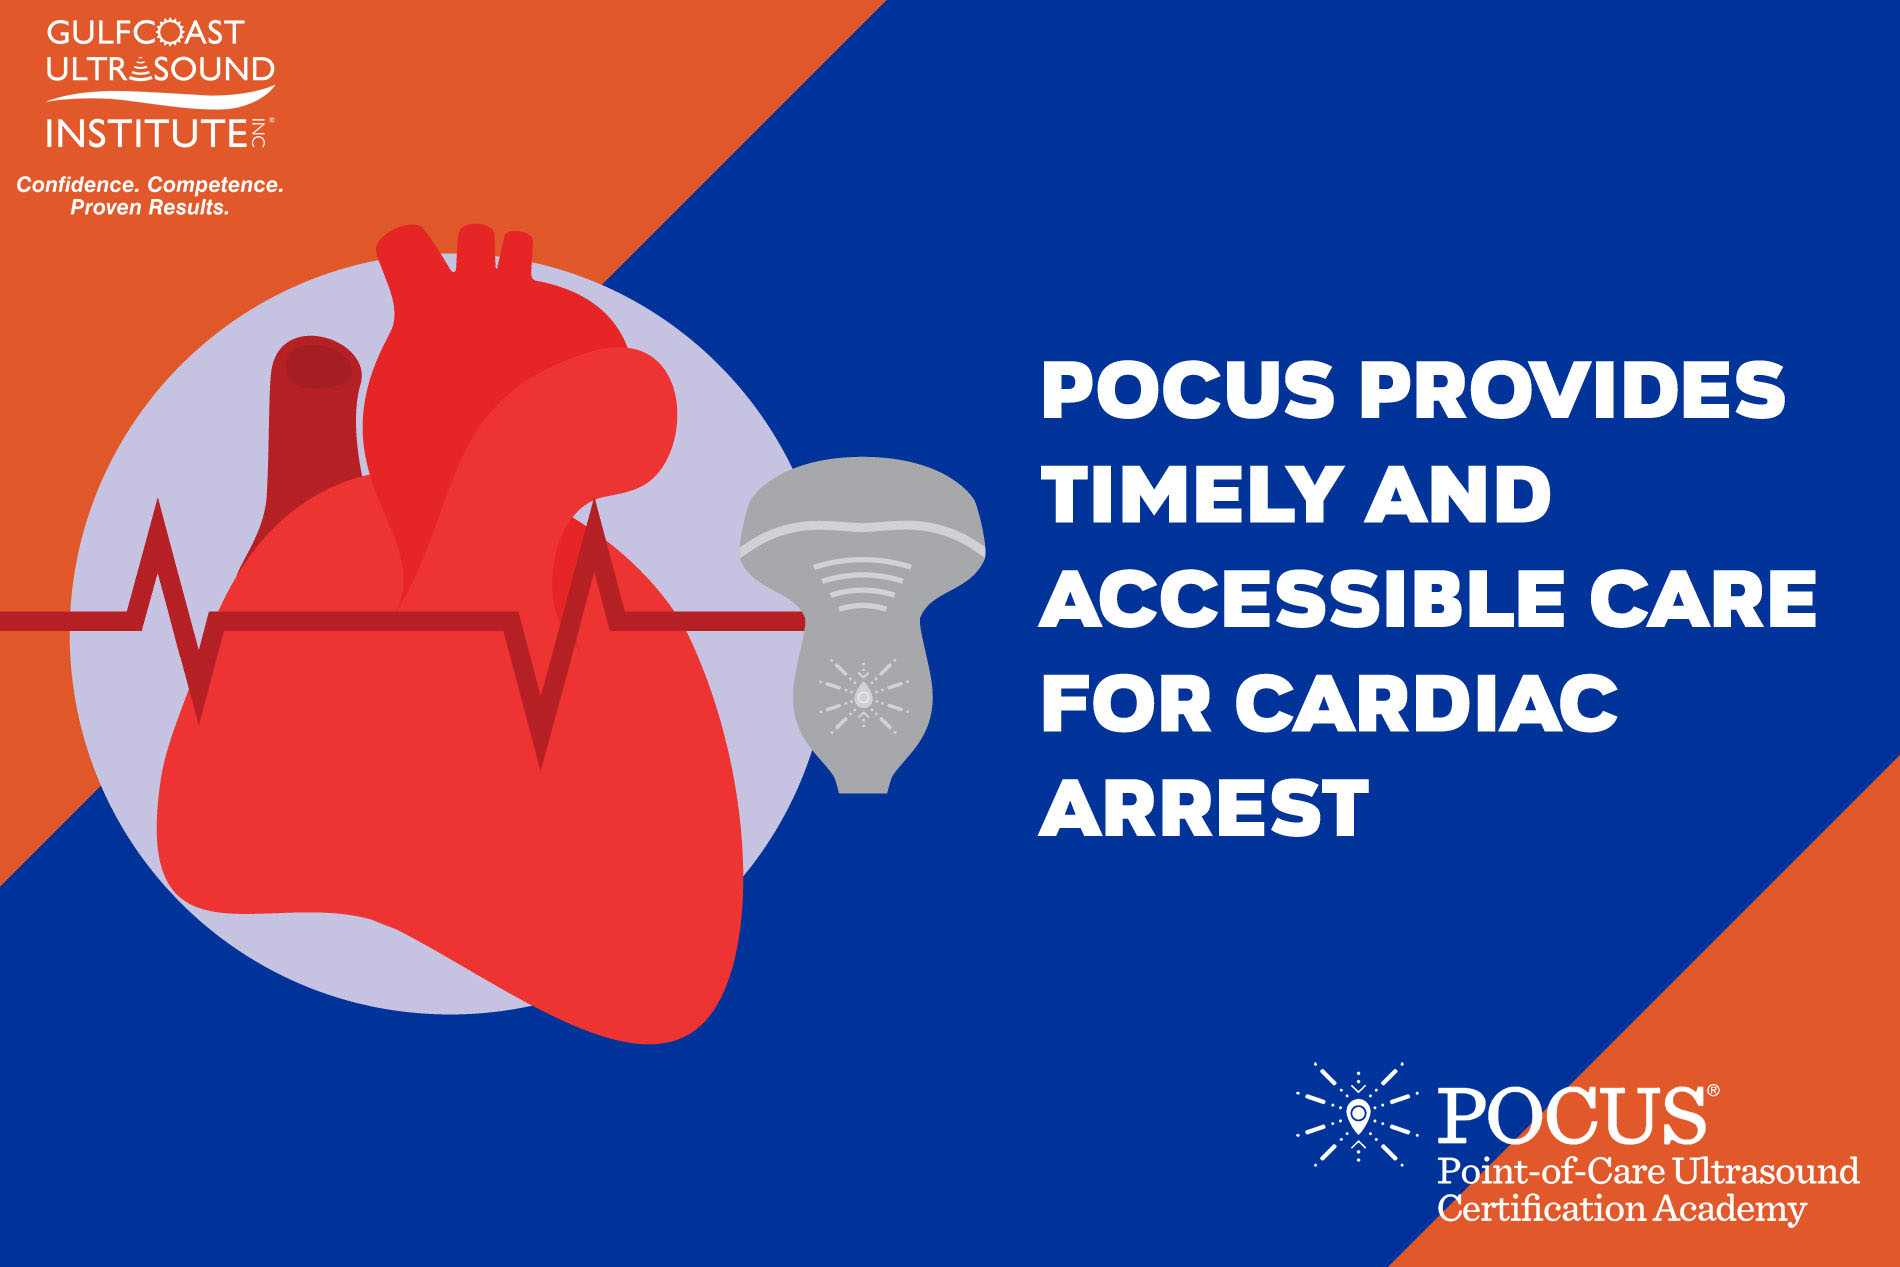 POCUS Provides Timely and Accessible Care for Cardiac Arrest